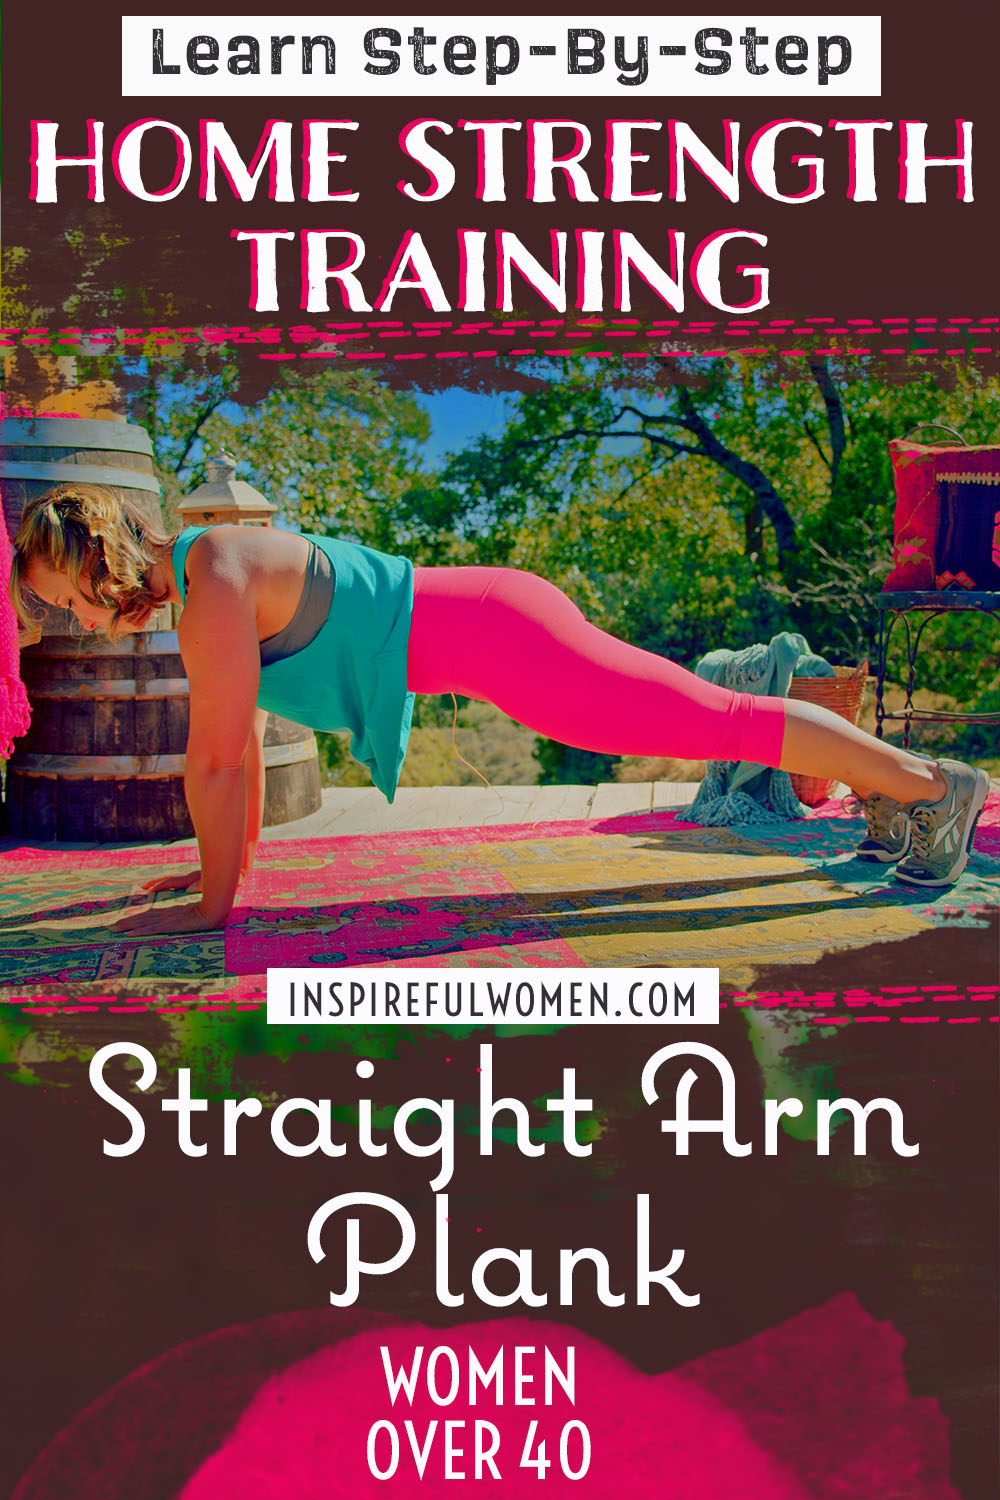 plank-straight-arm-bodyweight-core-toning-exercise-at-home-women-40-plus